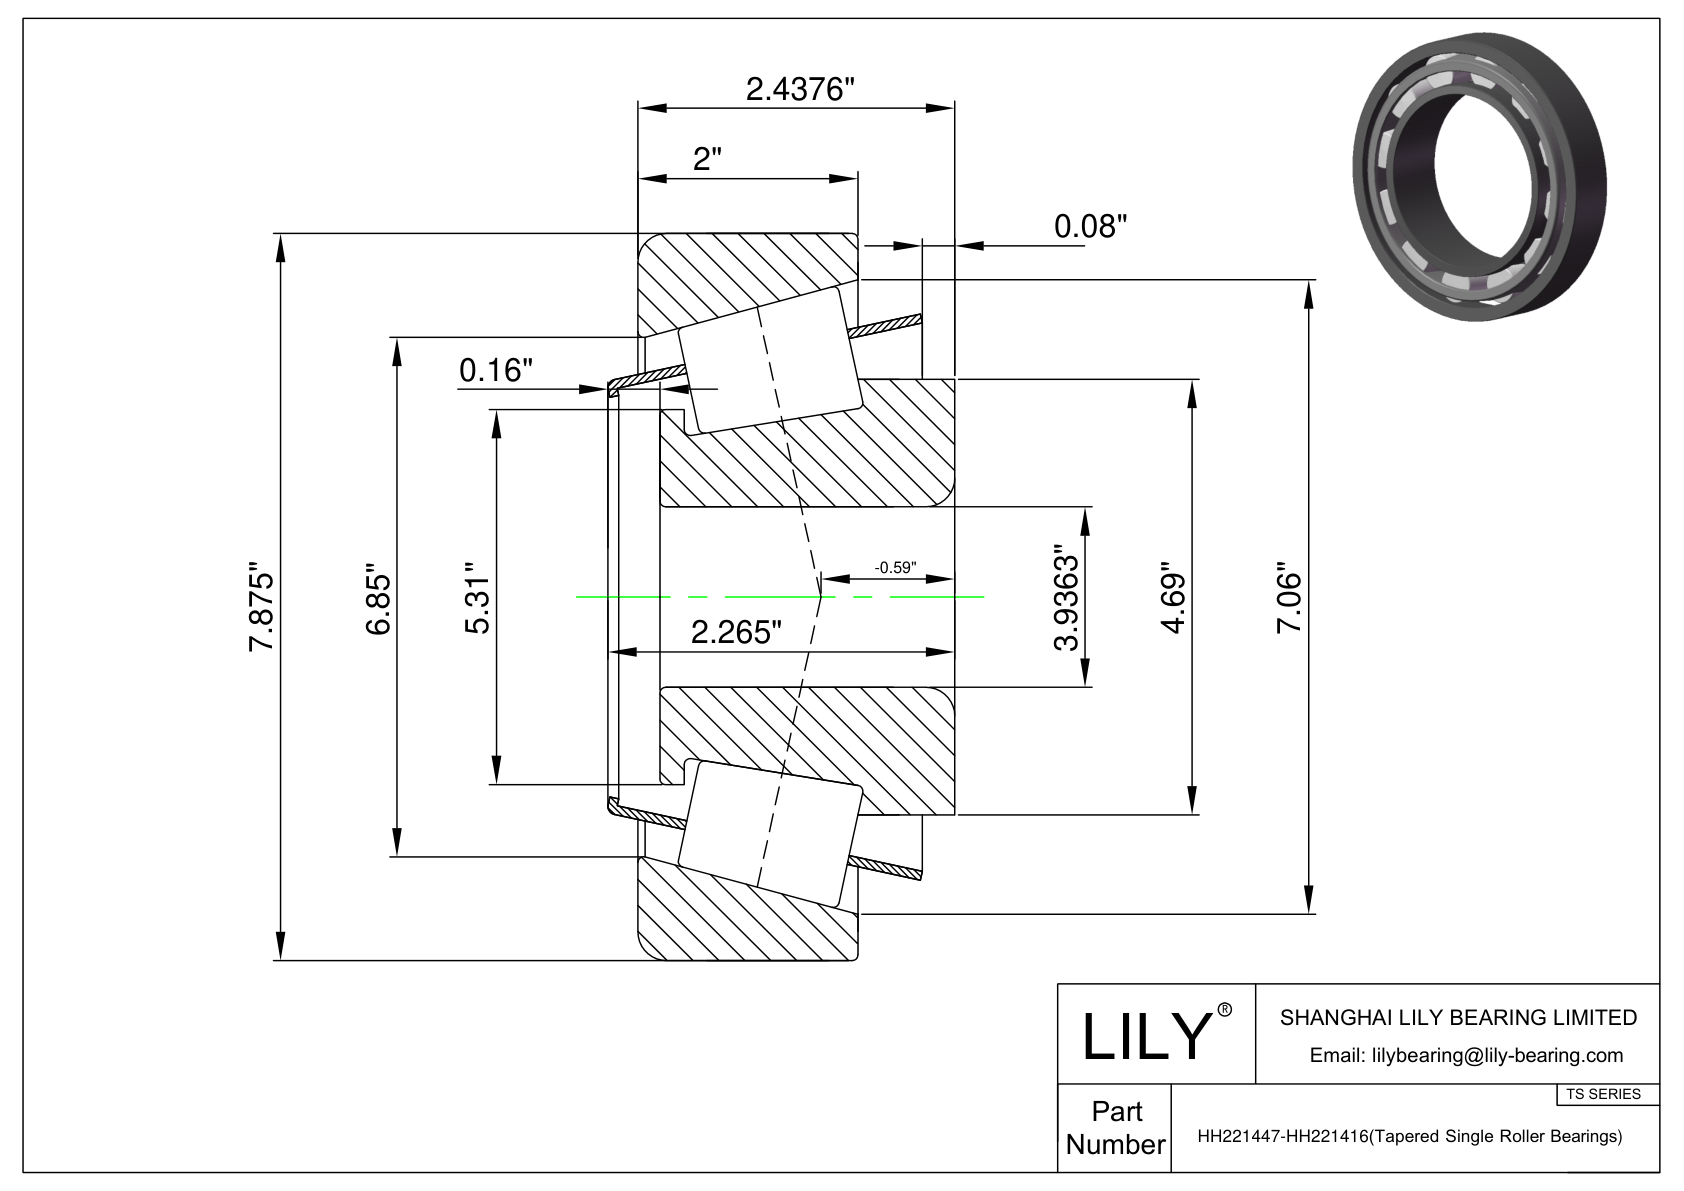 HH221447-HH221416 TS (Tapered Single Roller Bearings) (Imperial) cad drawing